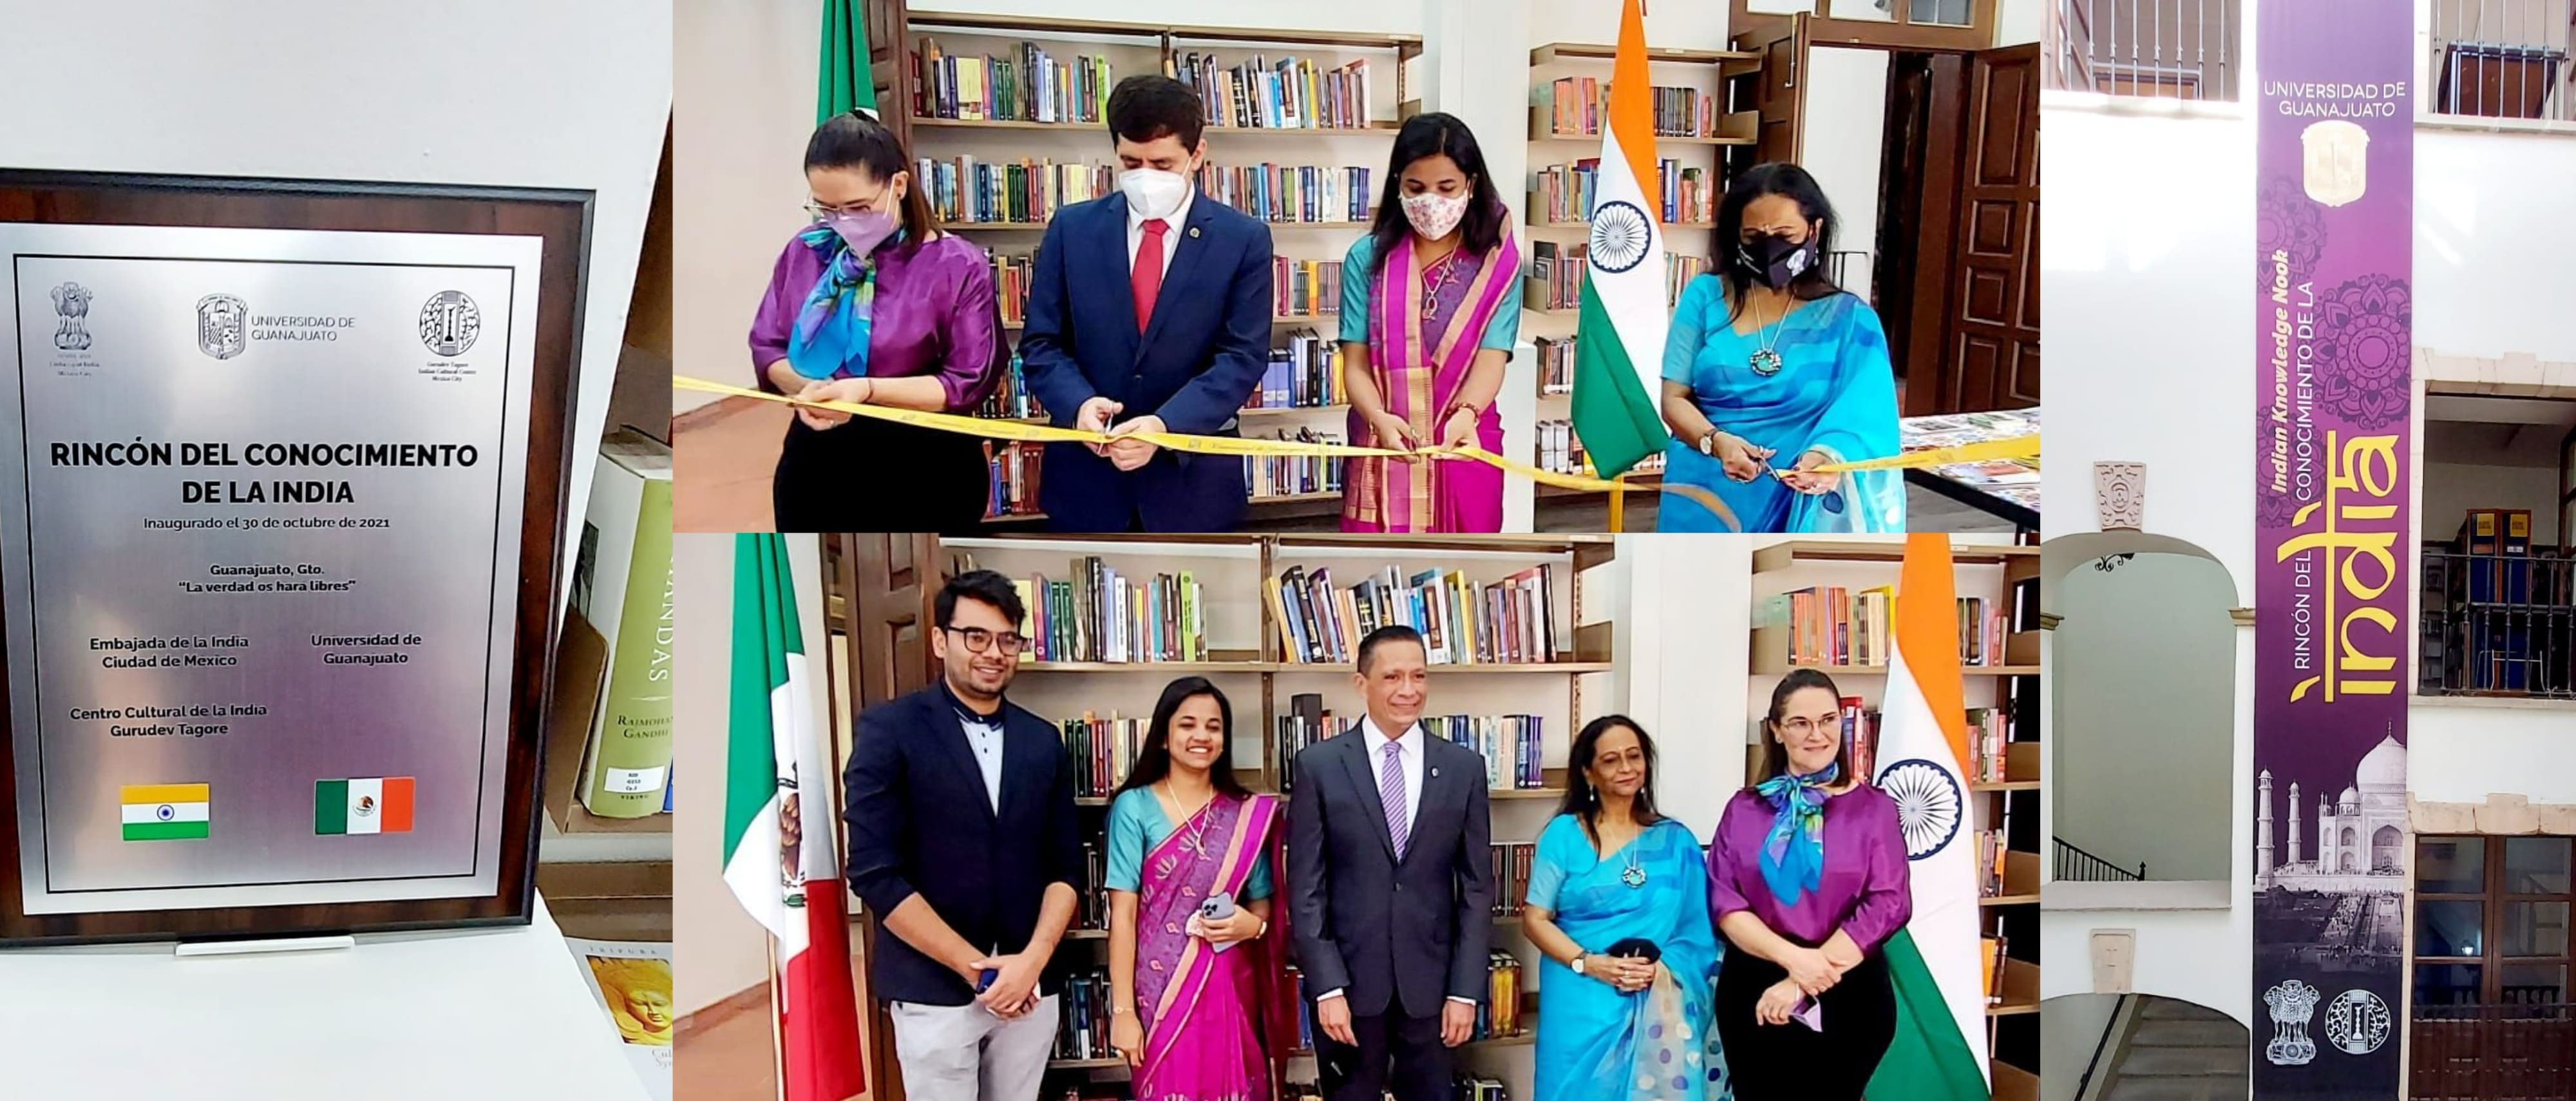  Cd'A Ms.Juhi Rai and Director, GTICC Mrs.Shrimati Das inaugurated 'The Indian Knowledge Nook' at University of Guanajuato. The books given reflect various aspects of India-culture, economy, tourism, literature and even traditional medicinal system such as Ayurveda.